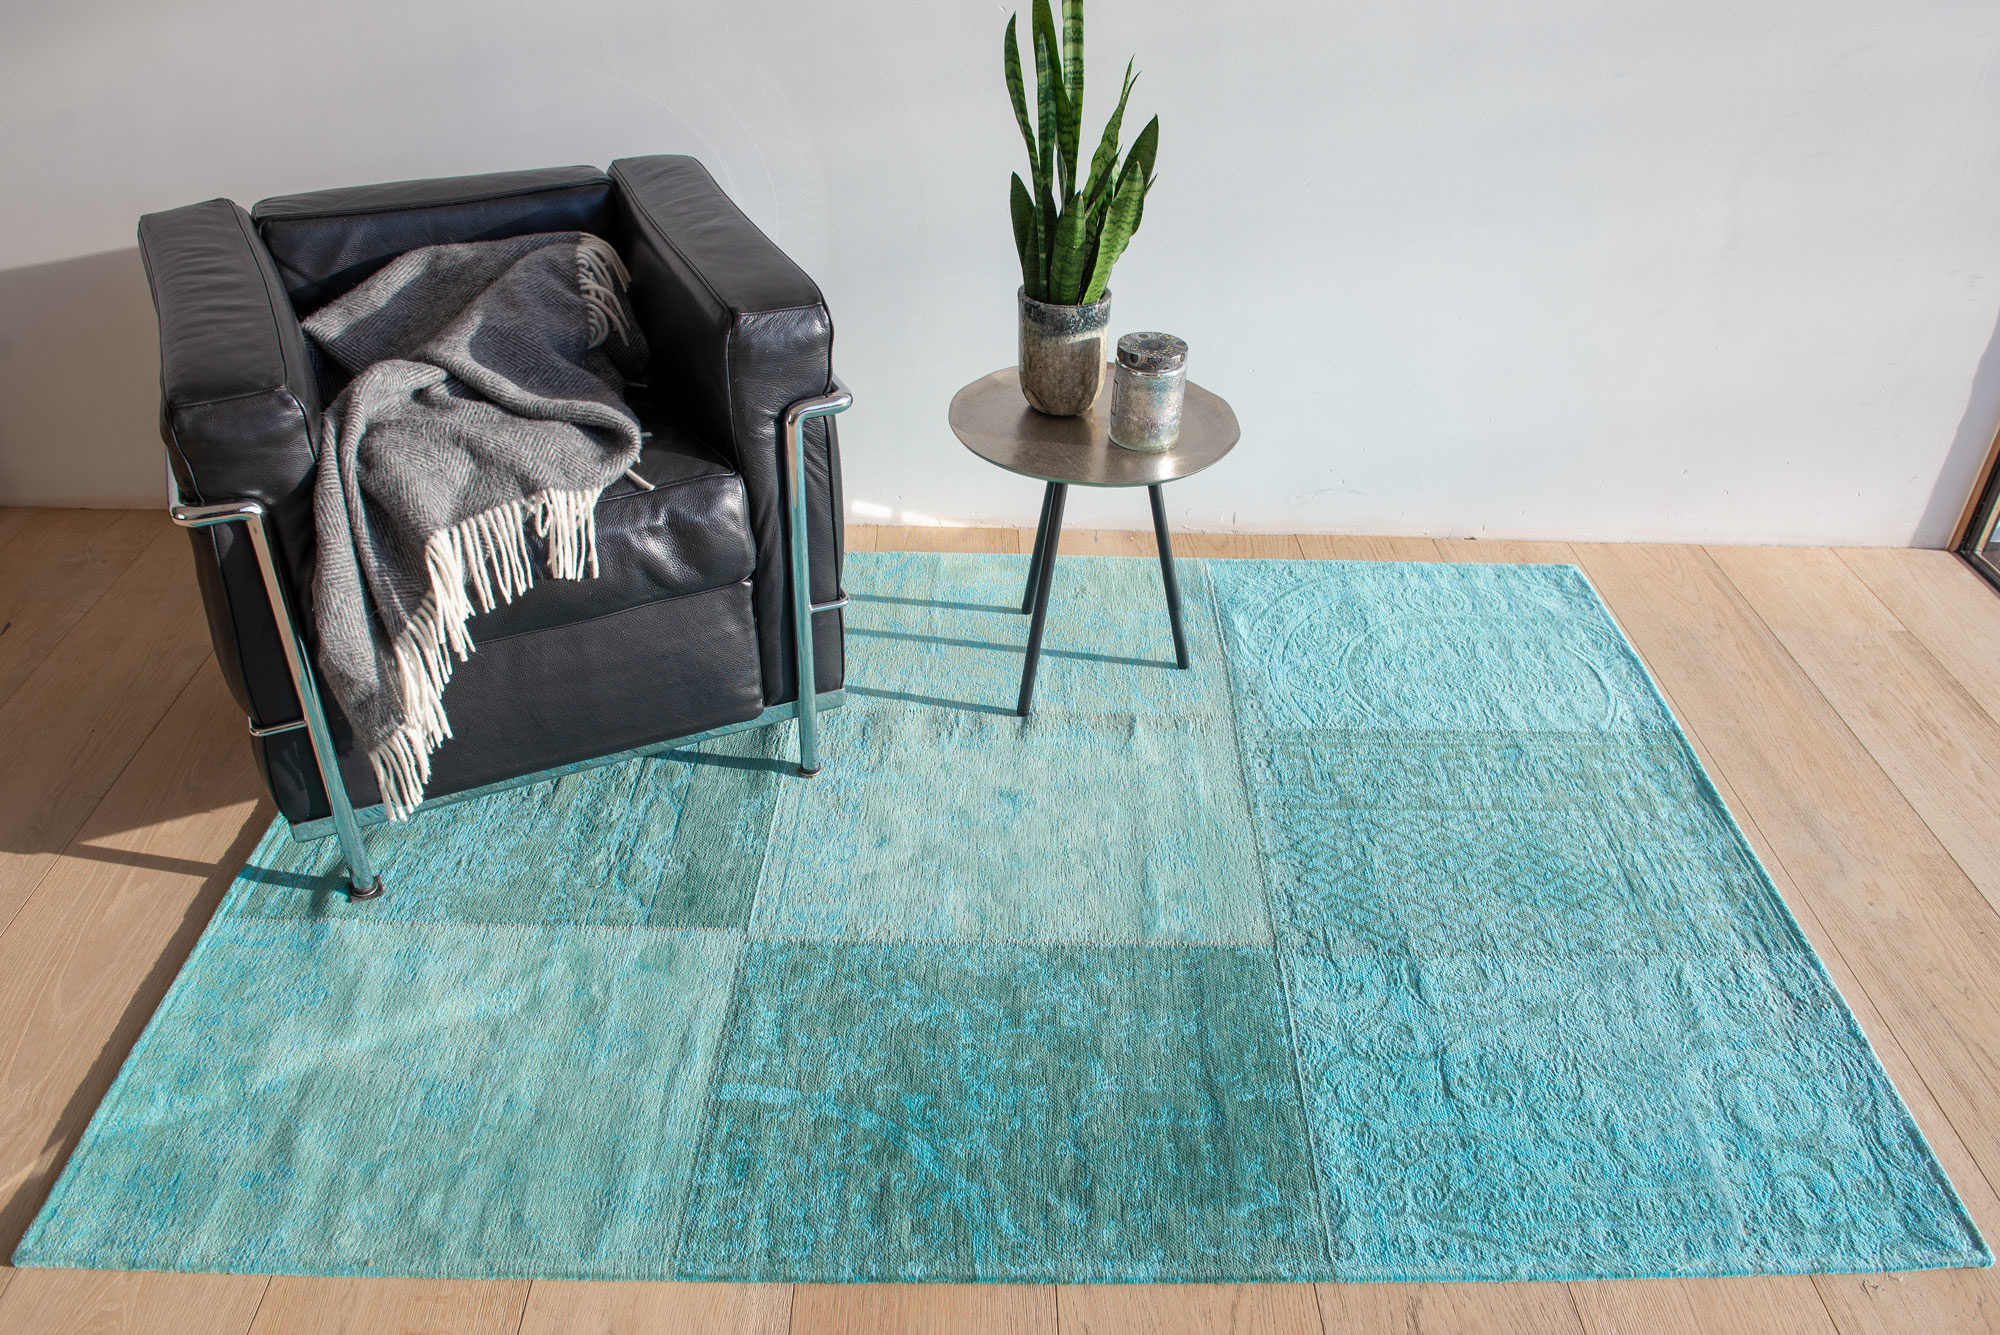 Patchwork Turquoise Rug ☞ Size: 2' 7" x 5' (80 x 150 cm)